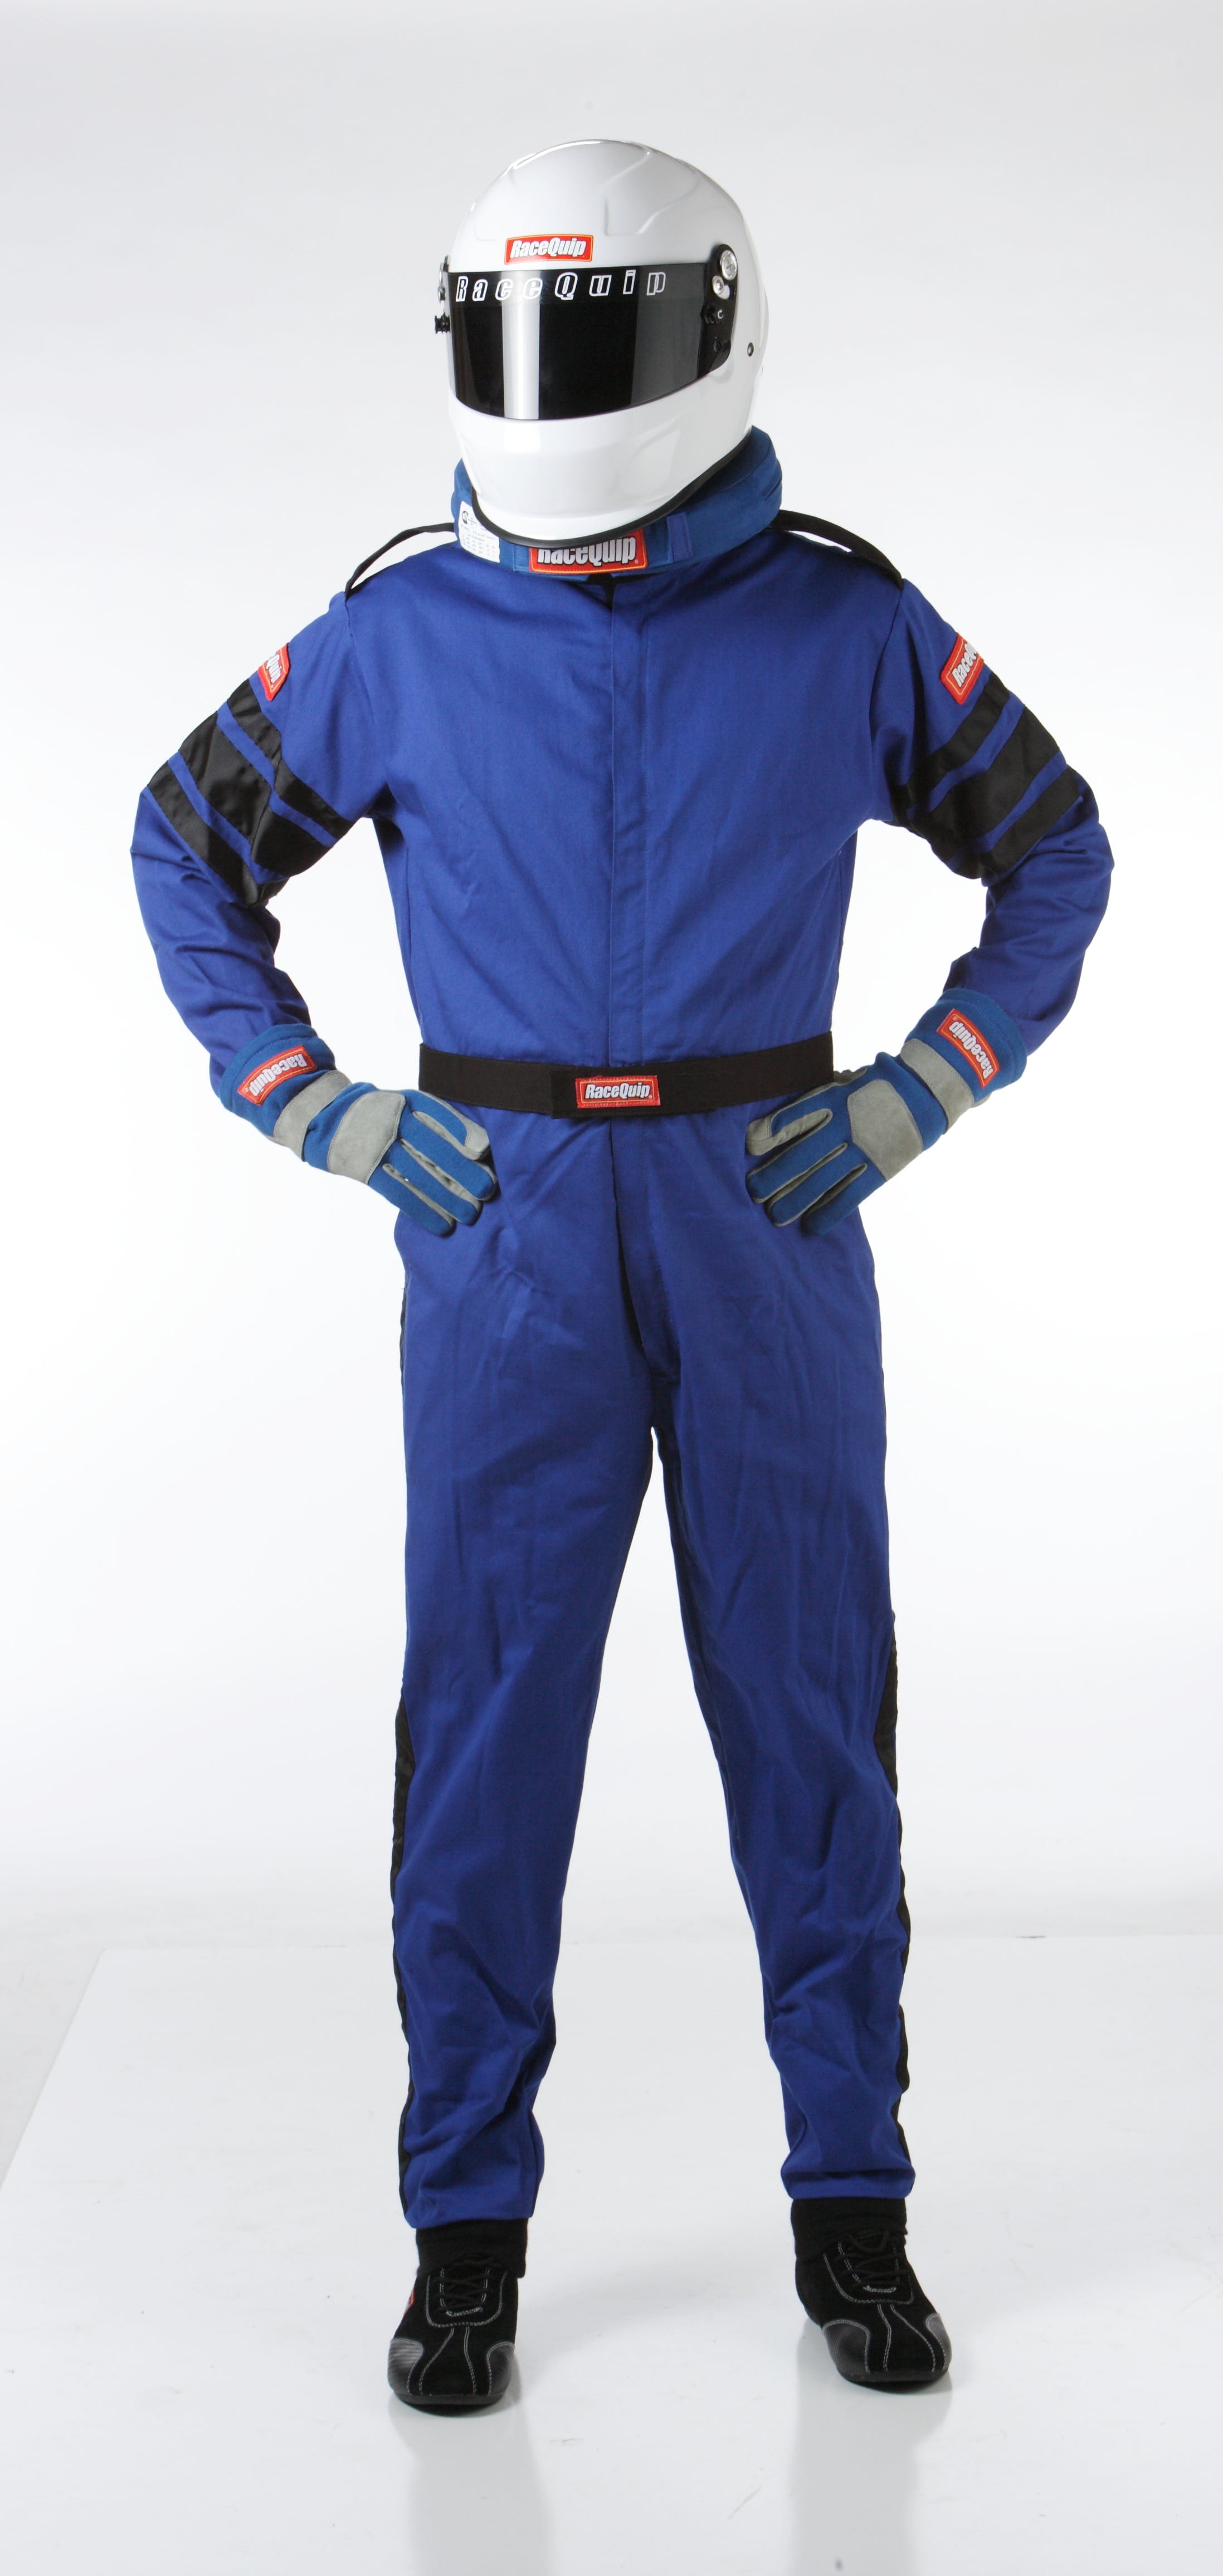 RaceQuip 110022 SFI-1 Pyrovatex One-Piece Single-Layer Racing Fire Suit (Blue, Small)